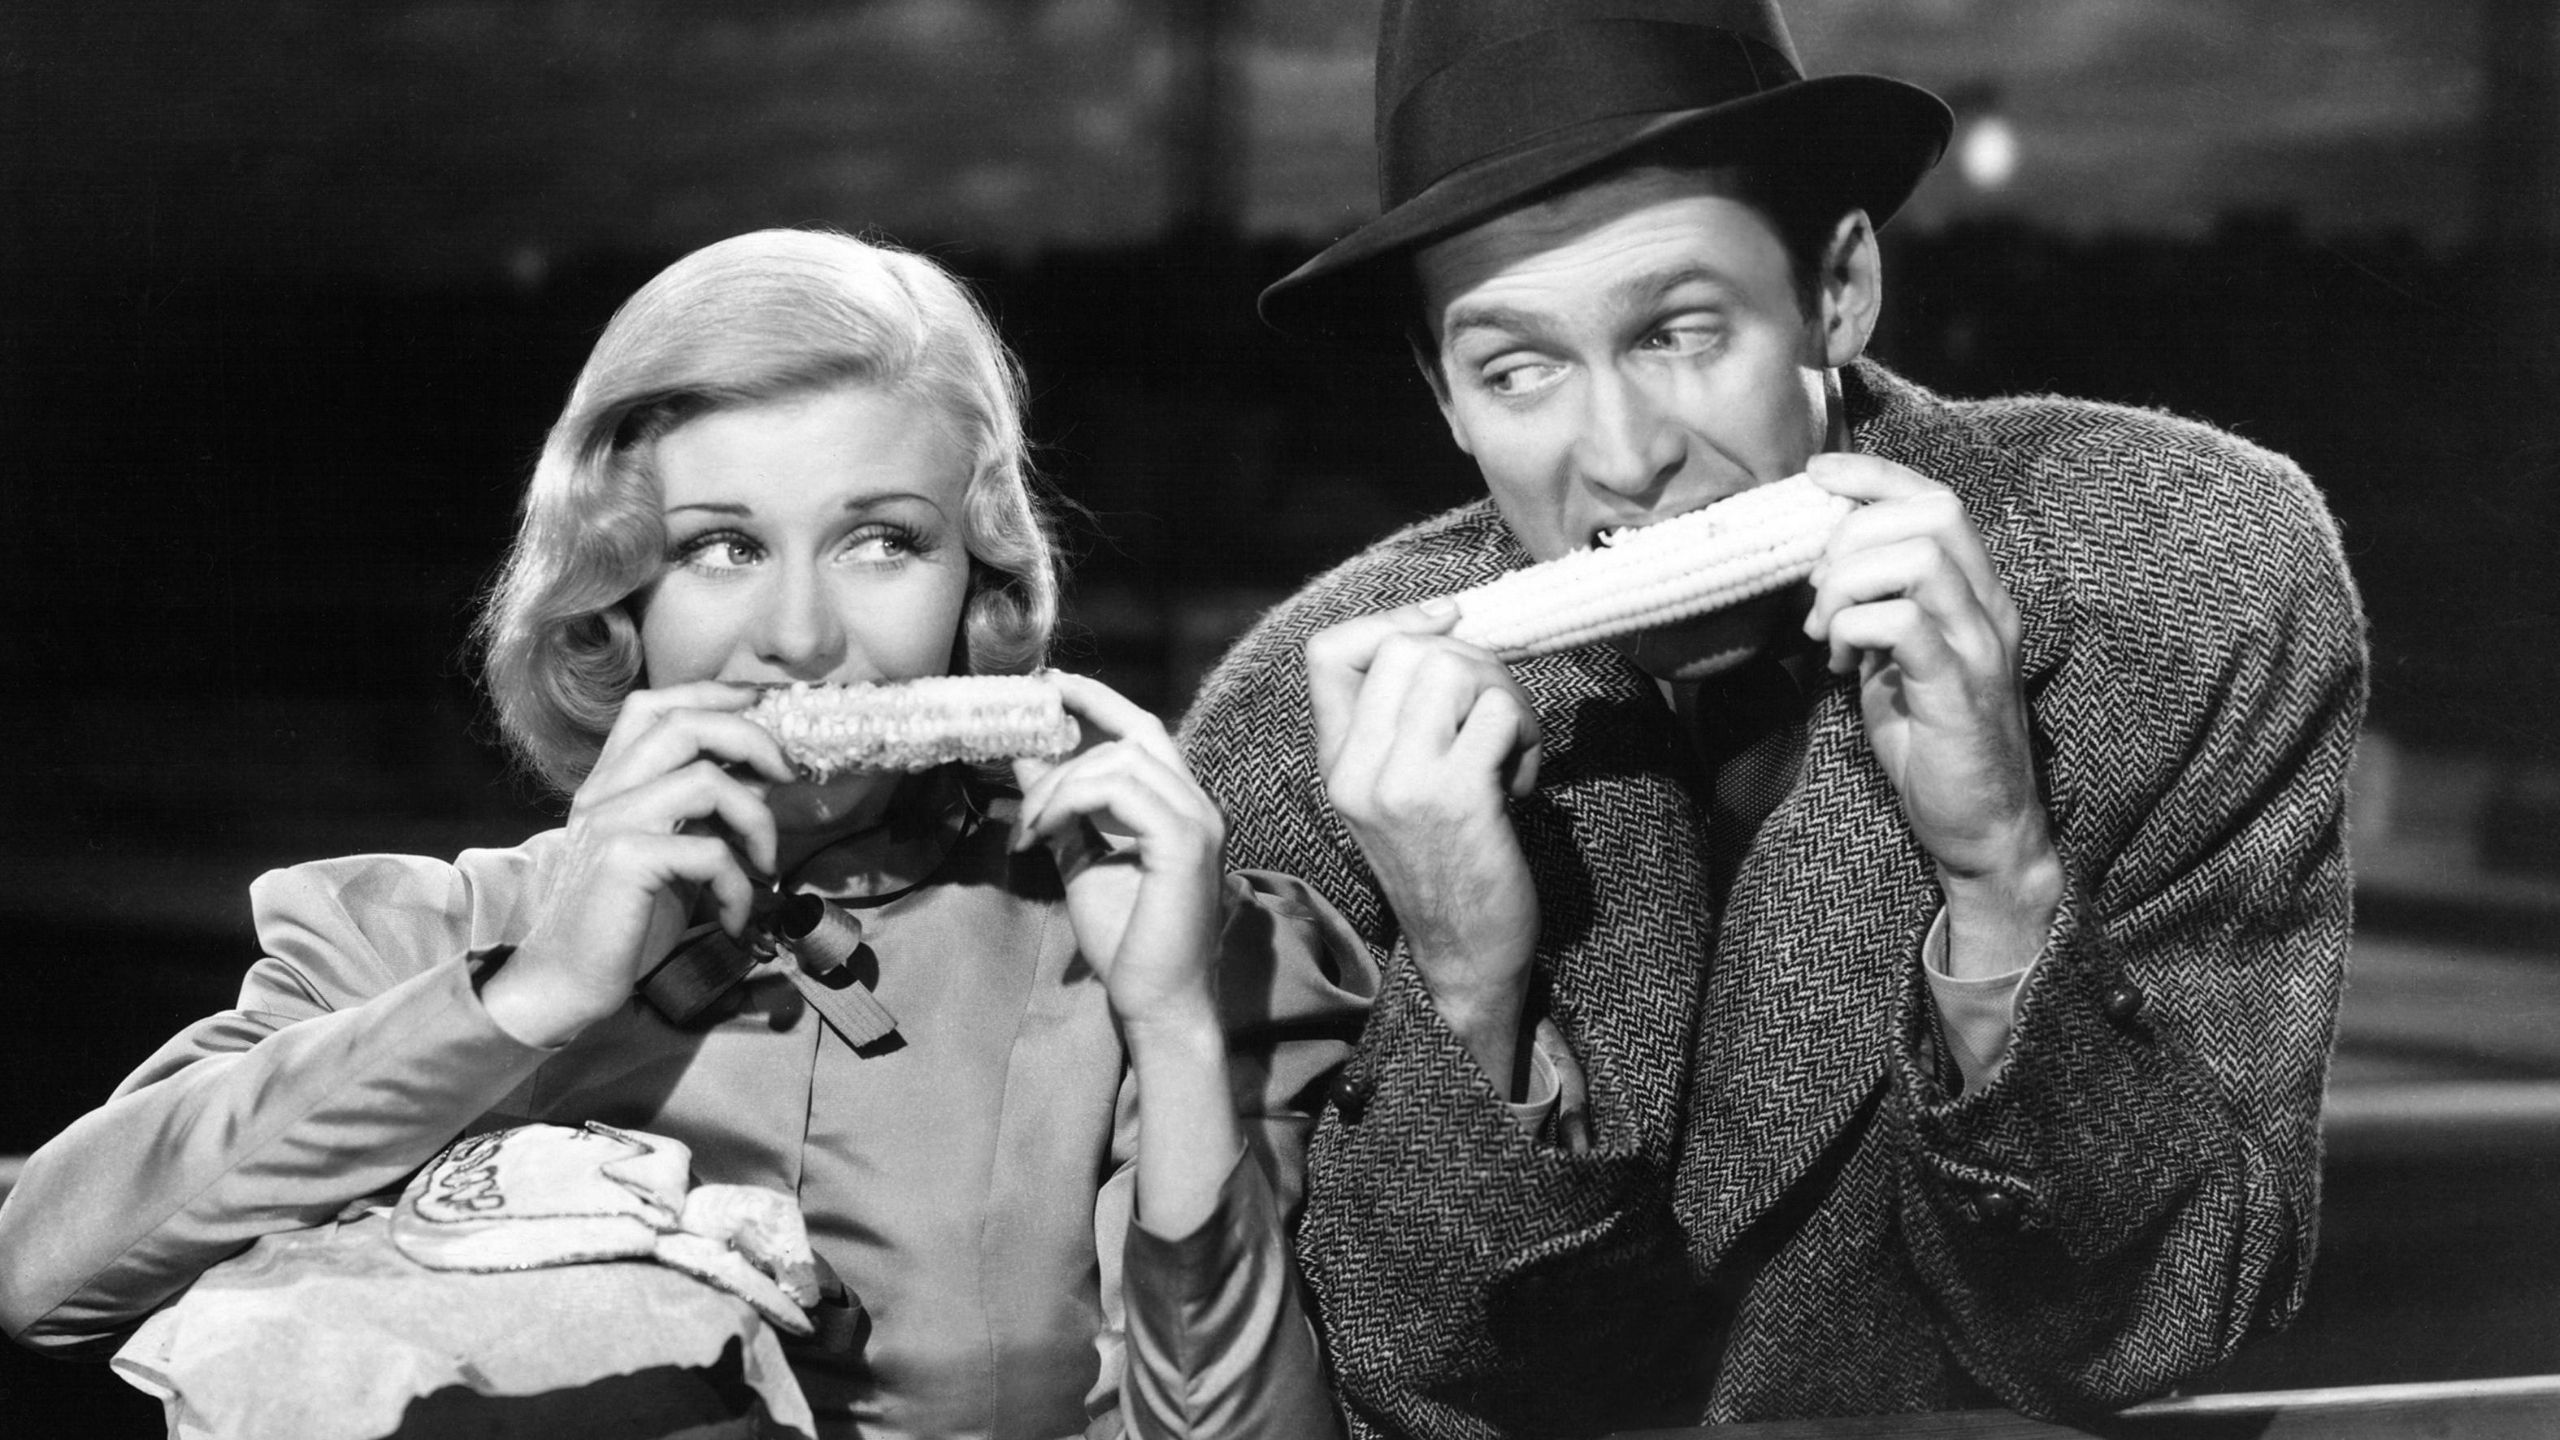 Black and white image of a man and a woman eating corn on the cob 